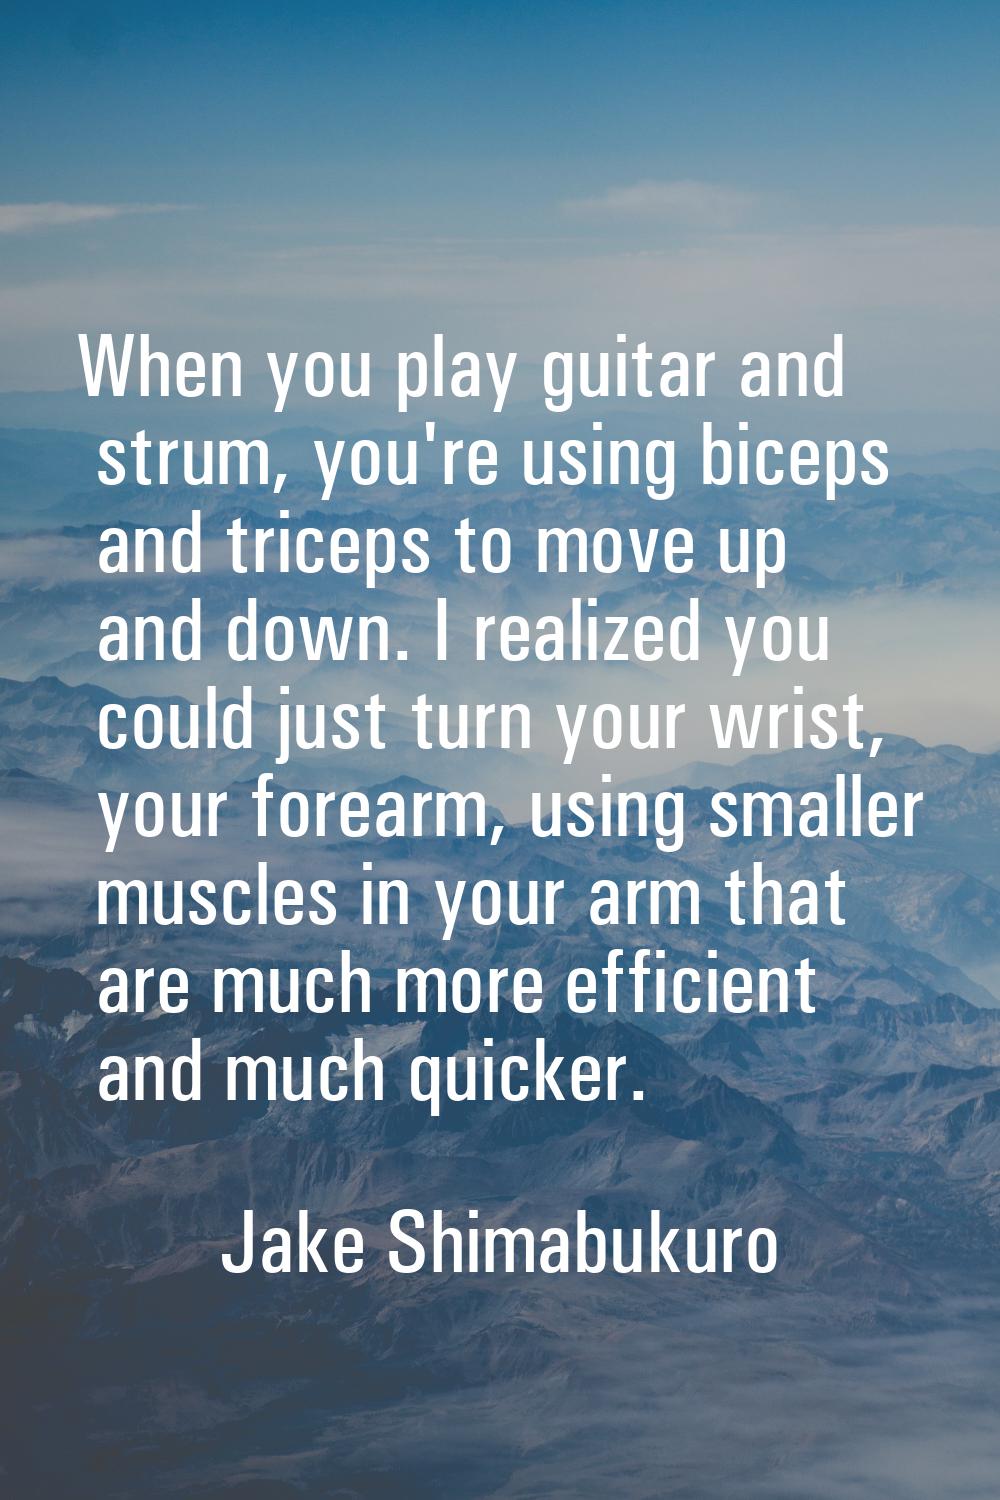 When you play guitar and strum, you're using biceps and triceps to move up and down. I realized you